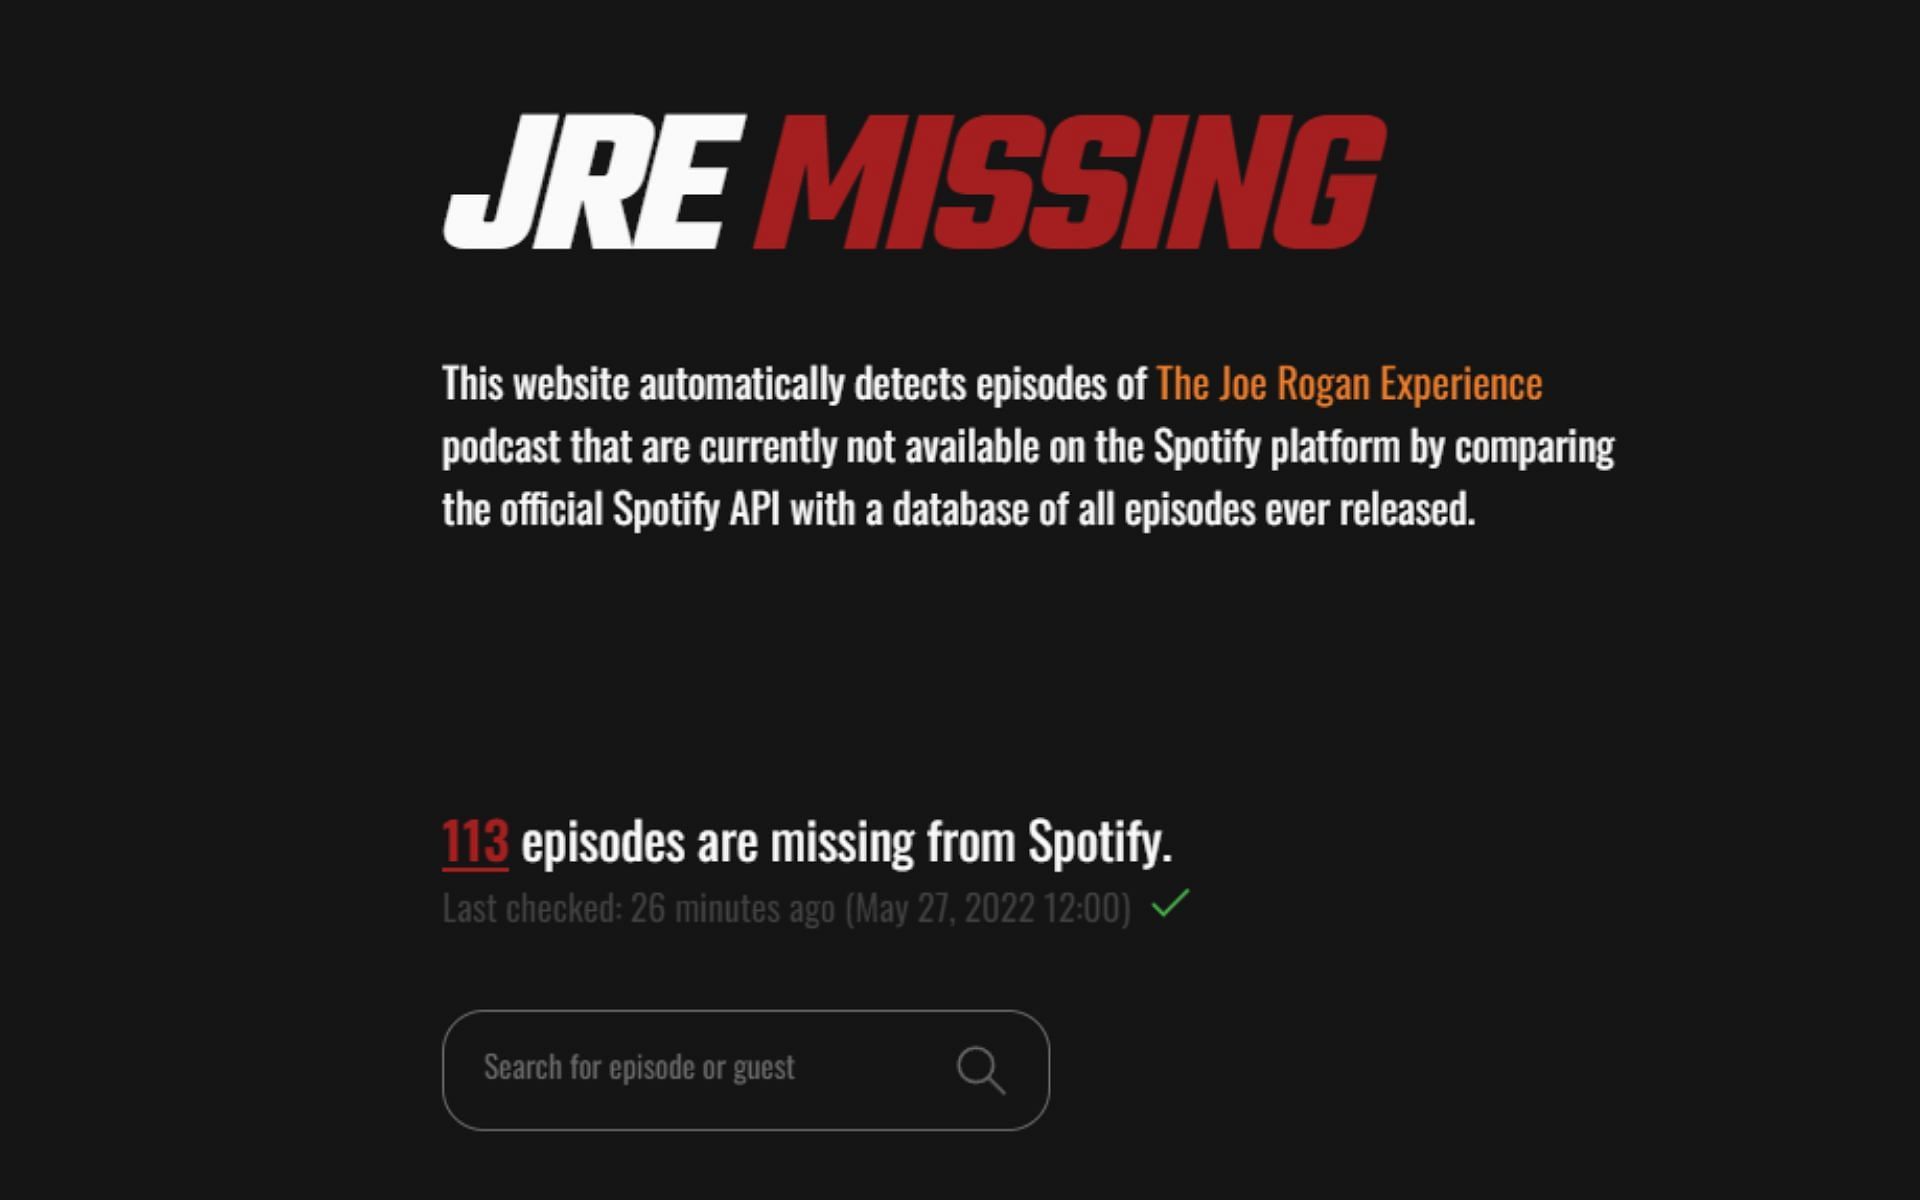 JRE Missing catalogued 113 deleted episodes of the Joe Rogan Experience